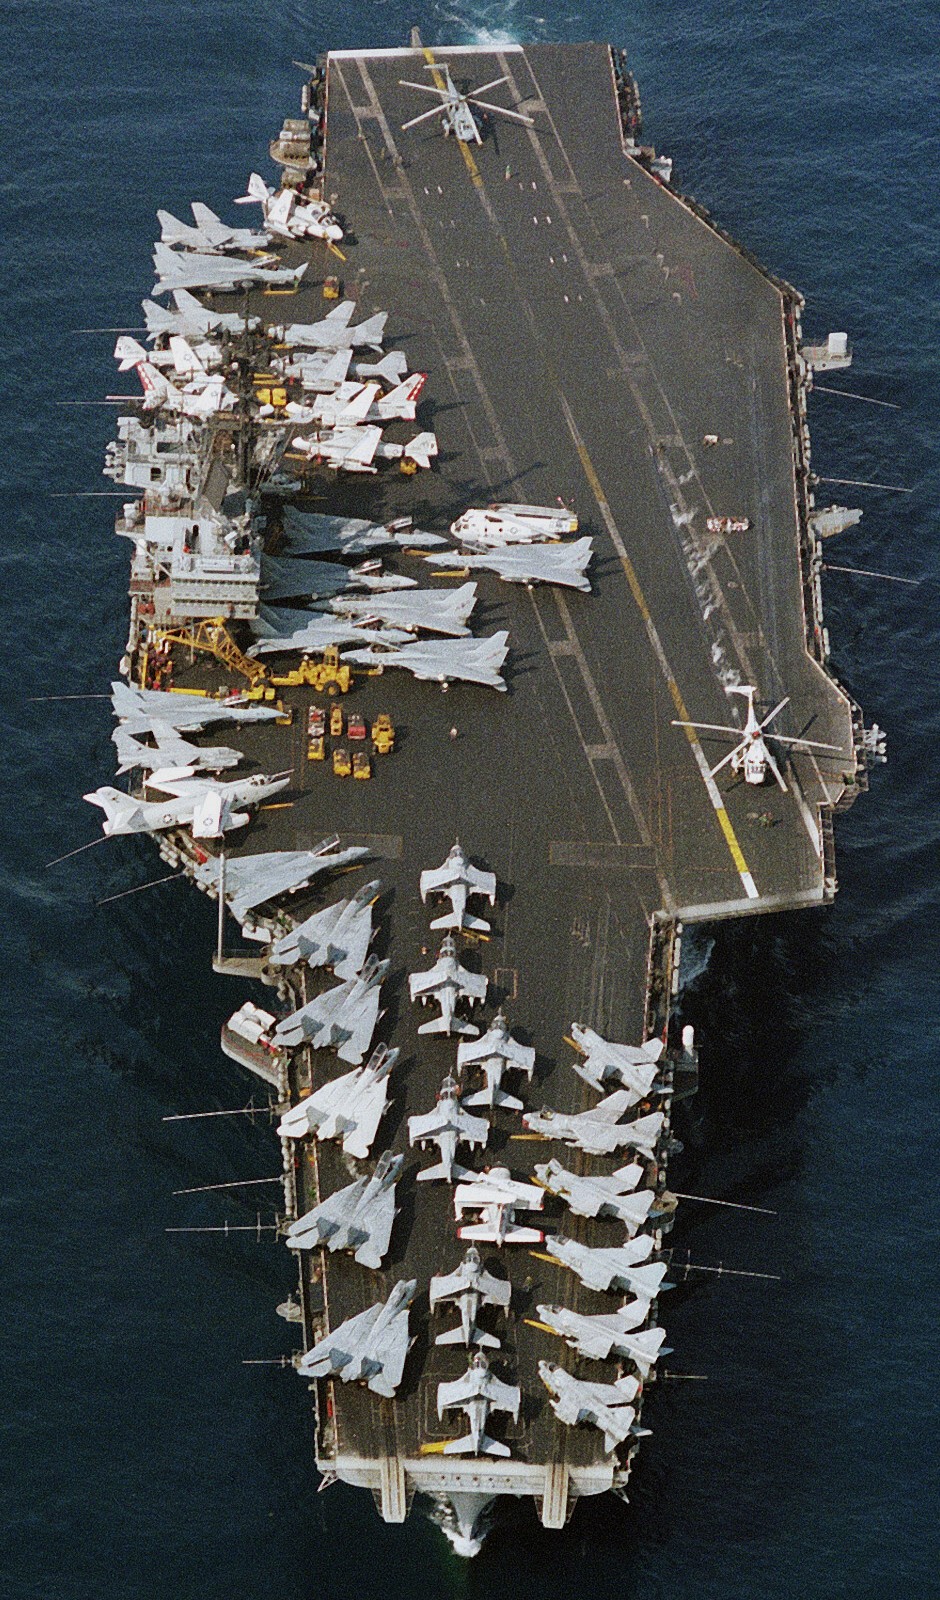 cv-60 uss saratoga forrestal class aircraft carrier air wing cvw-17 us navy off lybia 1986 87